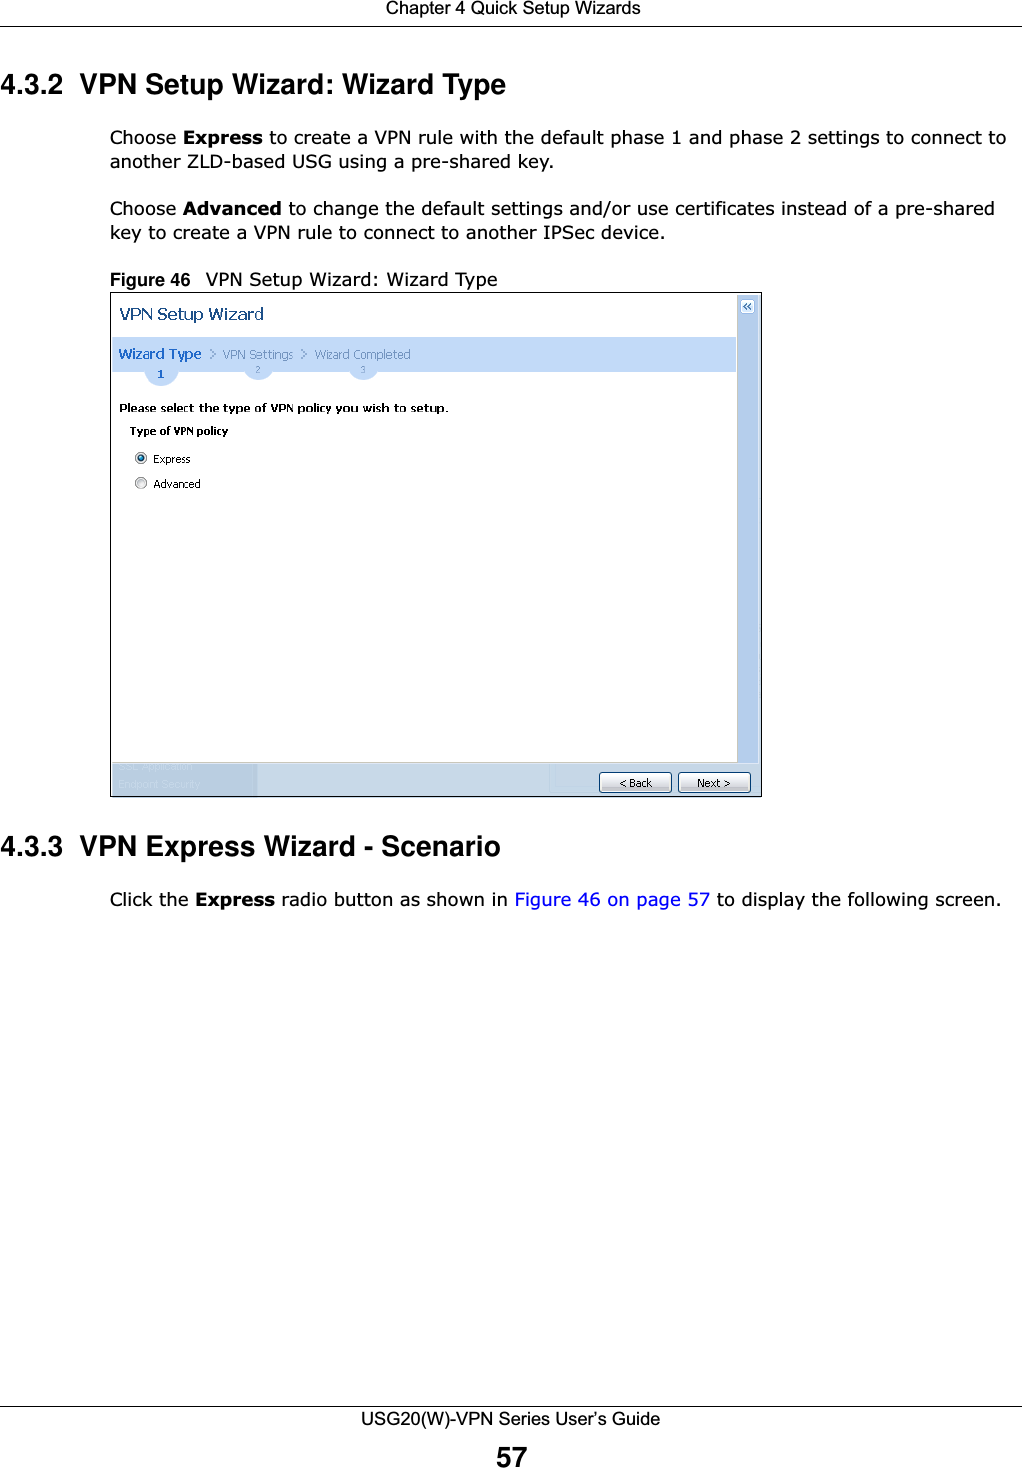  Chapter 4 Quick Setup WizardsUSG20(W)-VPN Series User’s Guide574.3.2  VPN Setup Wizard: Wizard TypeChoose Express to create a VPN rule with the default phase 1 and phase 2 settings to connect to another ZLD-based USG using a pre-shared key.Choose Advanced to change the default settings and/or use certificates instead of a pre-shared key to create a VPN rule to connect to another IPSec device. Figure 46   VPN Setup Wizard: Wizard Type4.3.3  VPN Express Wizard - Scenario Click the Express radio button as shown in Figure 46 on page 57 to display the following screen.